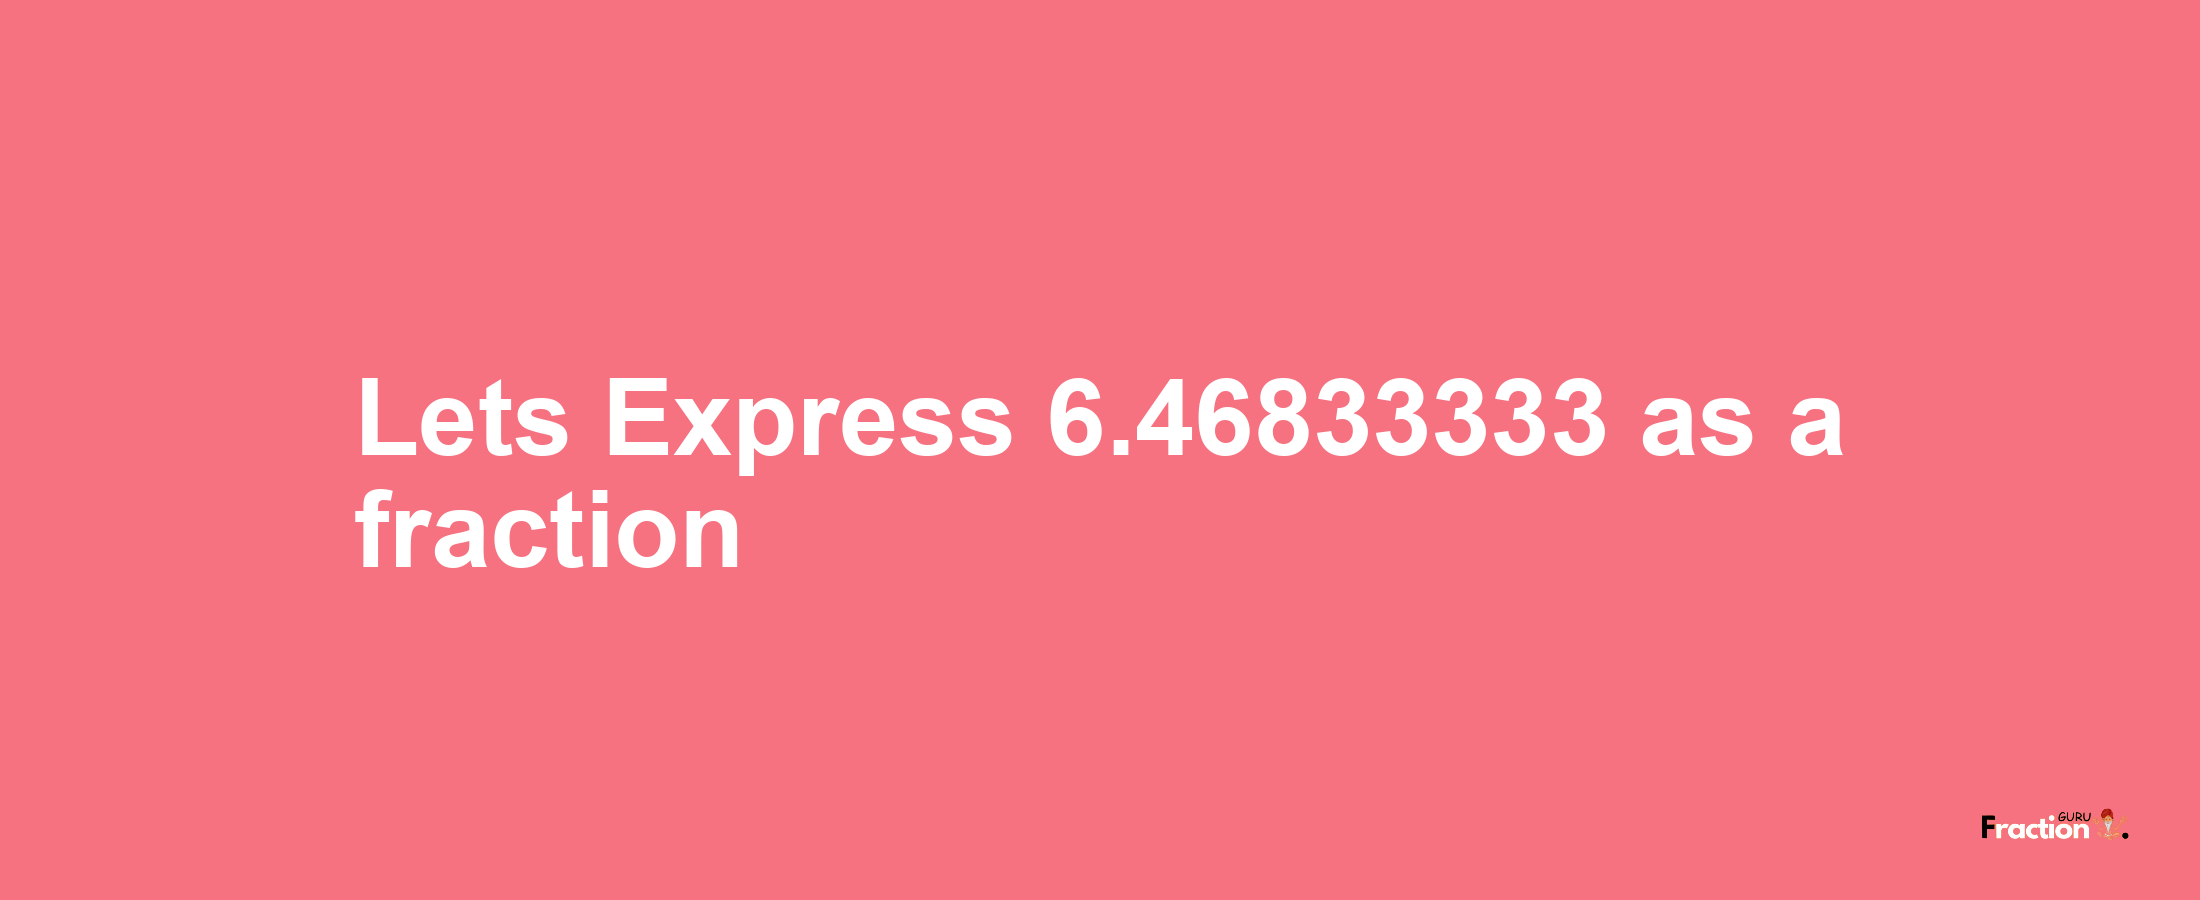 Lets Express 6.46833333 as afraction